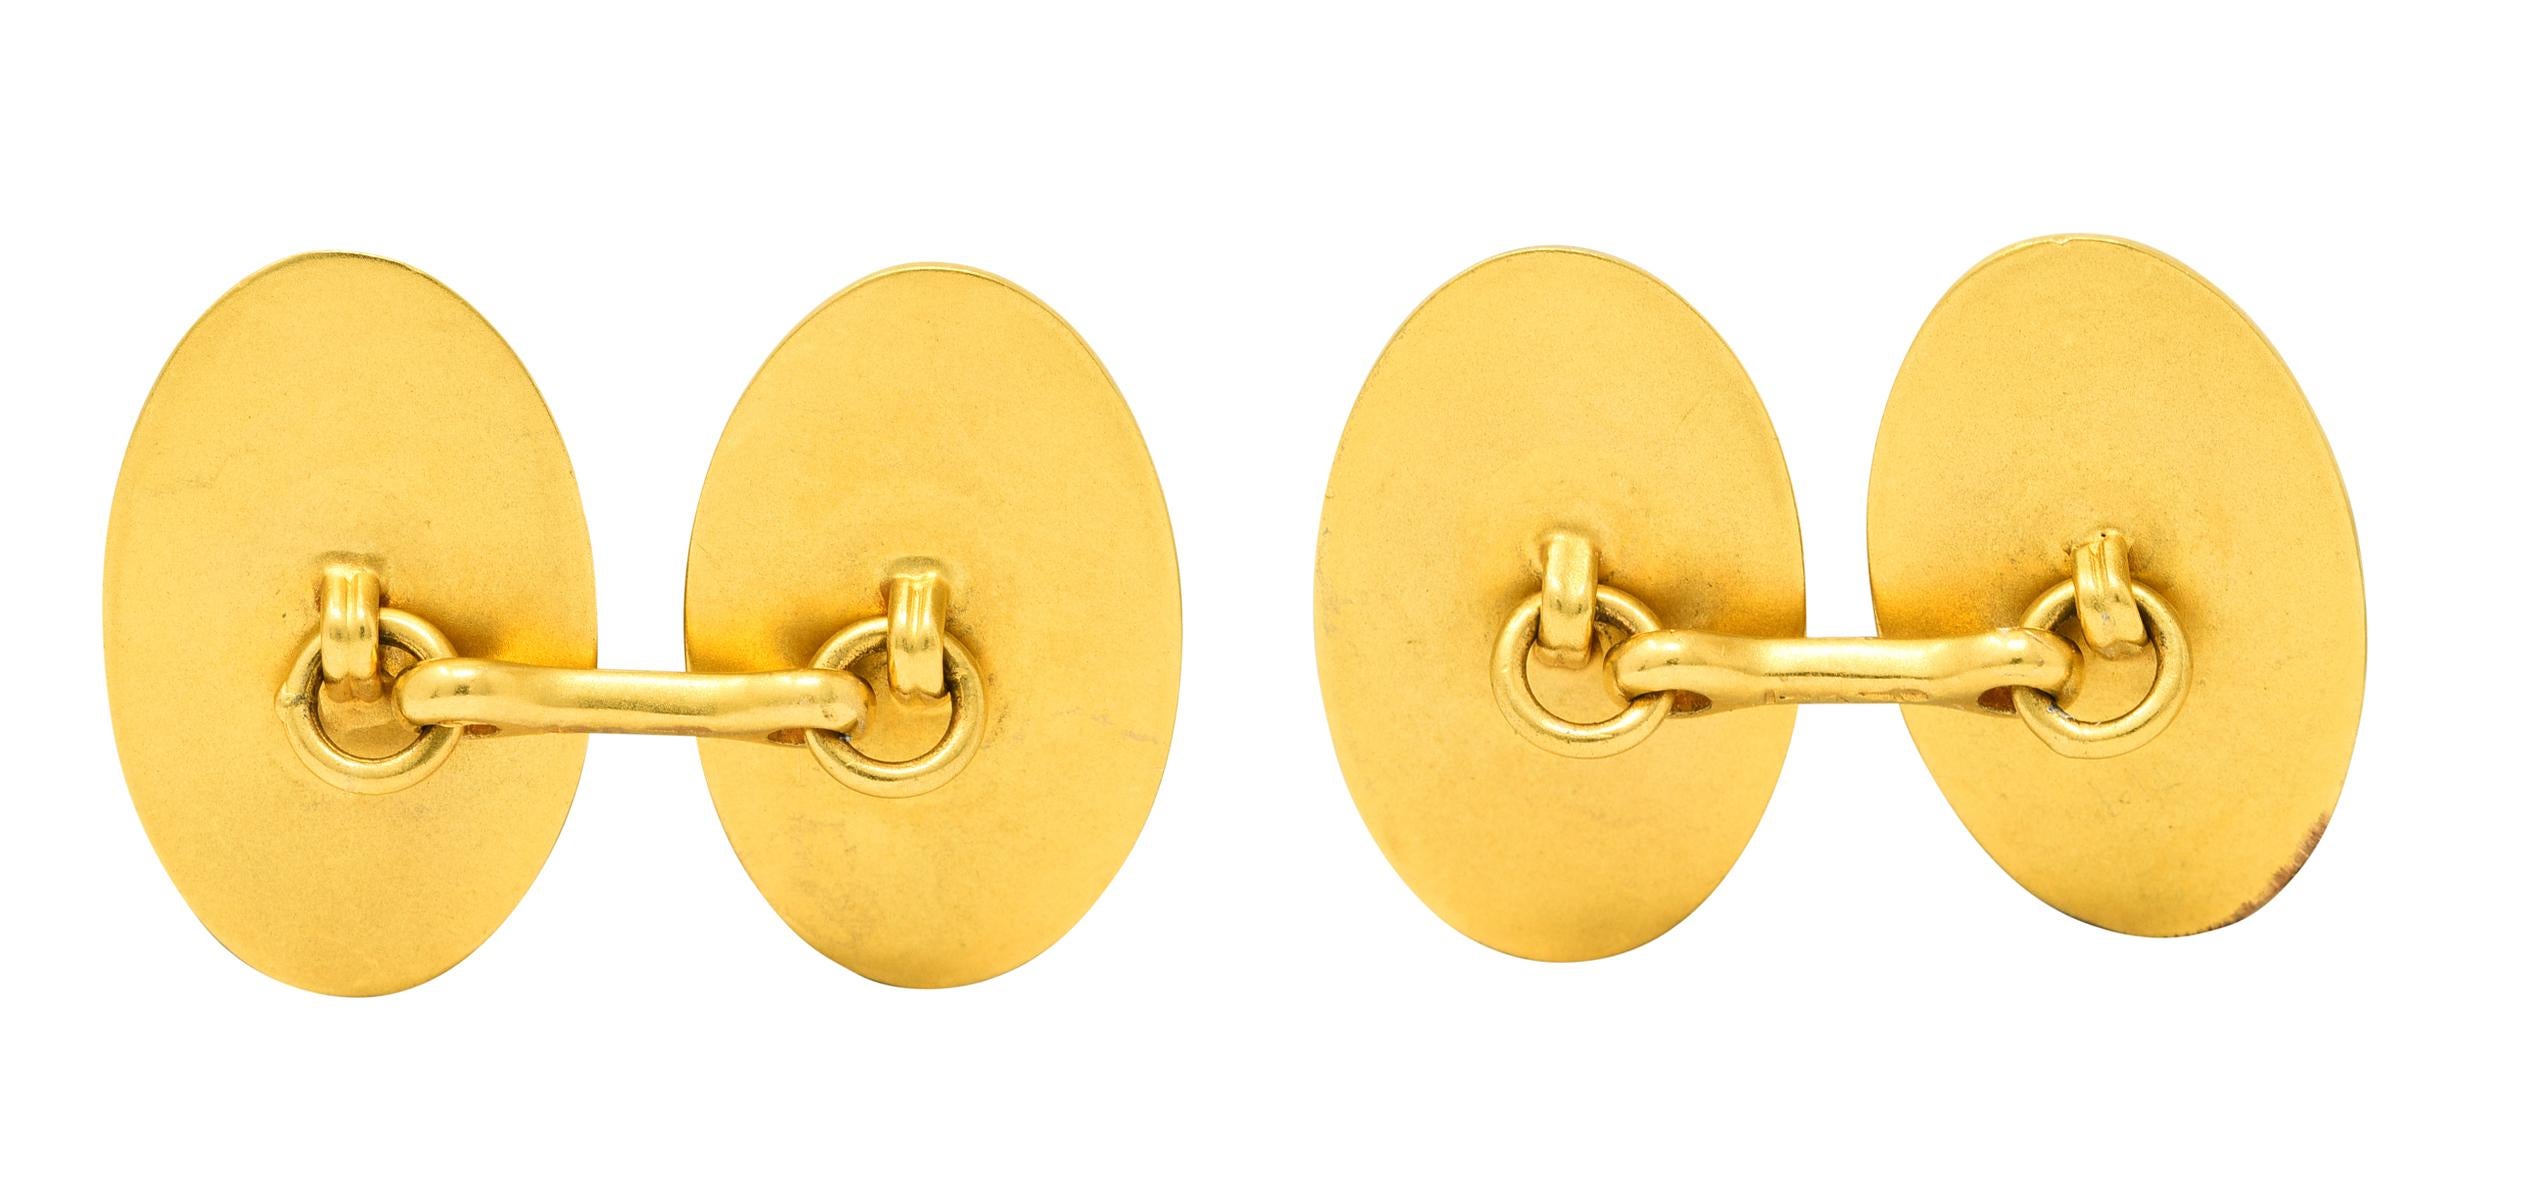 Link style cufflinks terminate as matte gold ovals

Depicting a serene scene of stylized waves under a full moon motif

Stamped 14K for 14 karat gold

Maker's mark for Bippart & Co.

Circa: 1905

Length: 3/4 inch

Oval measures: 1/2 x 13/16